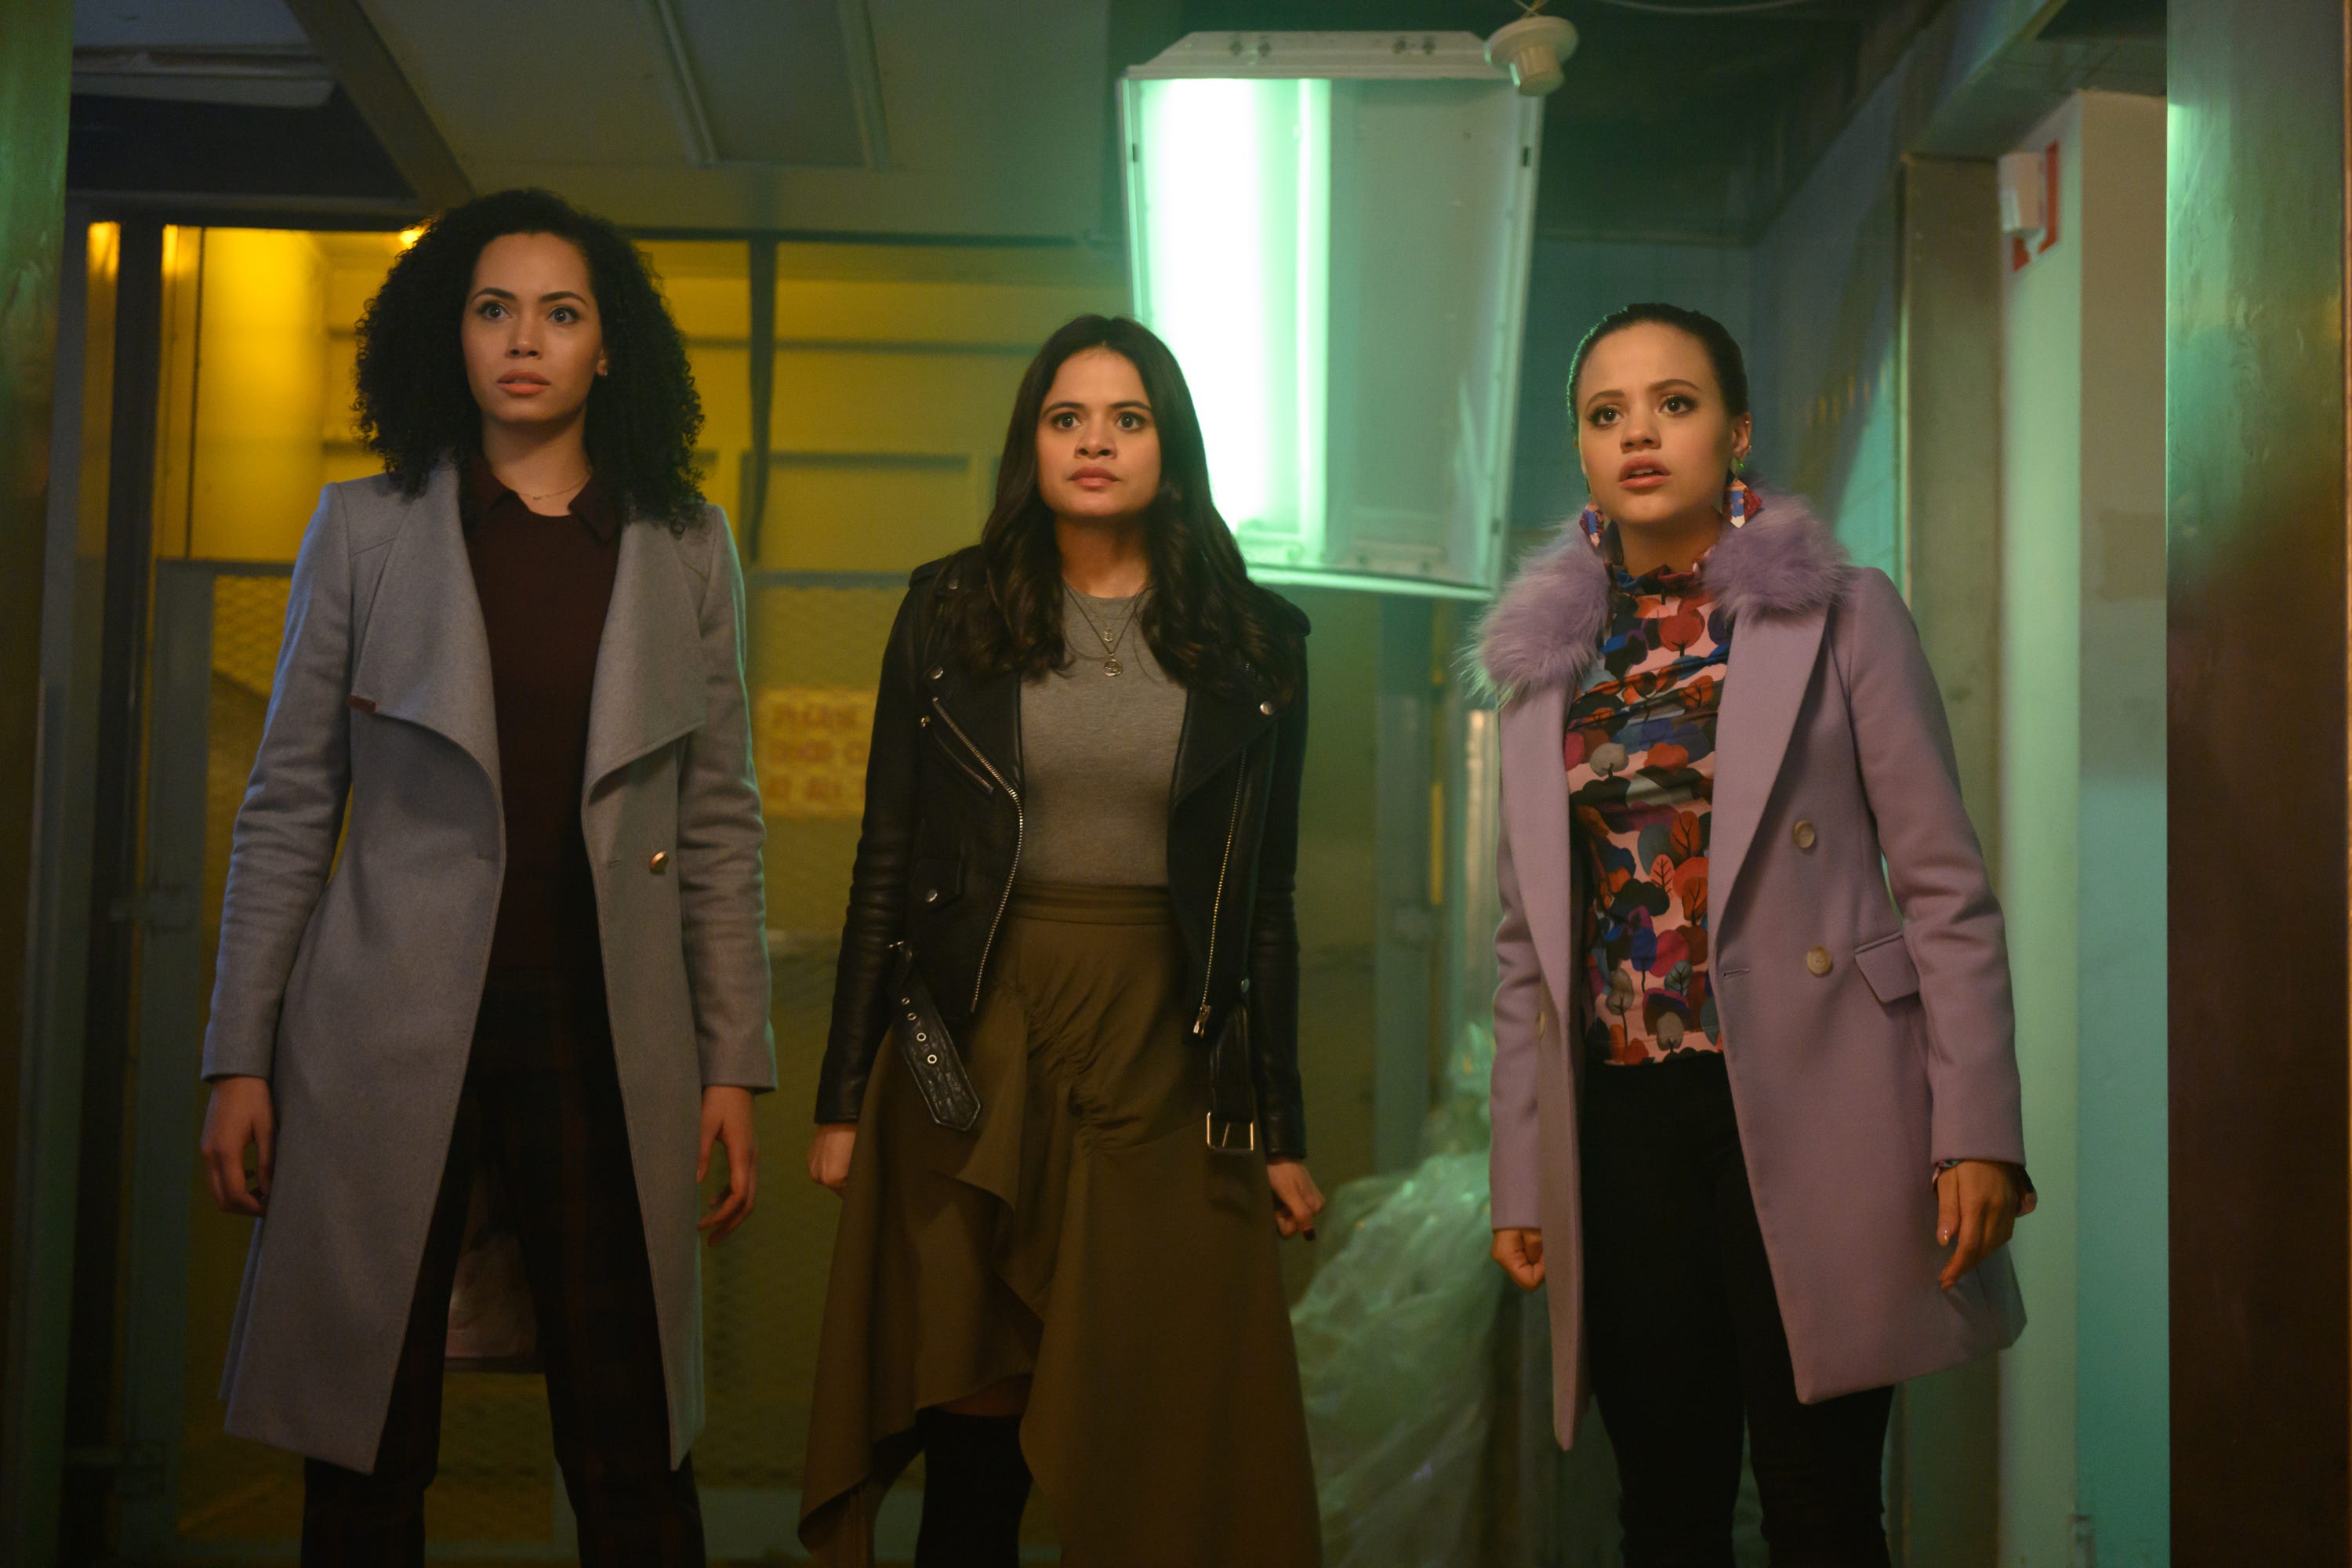 The CW debuted its rebooted version of "Charmed" in 2018 with Madeleine Mantock, Melonie Diaz and Sarah Jeffery as sisters who use their supernatural powers to fight evil.